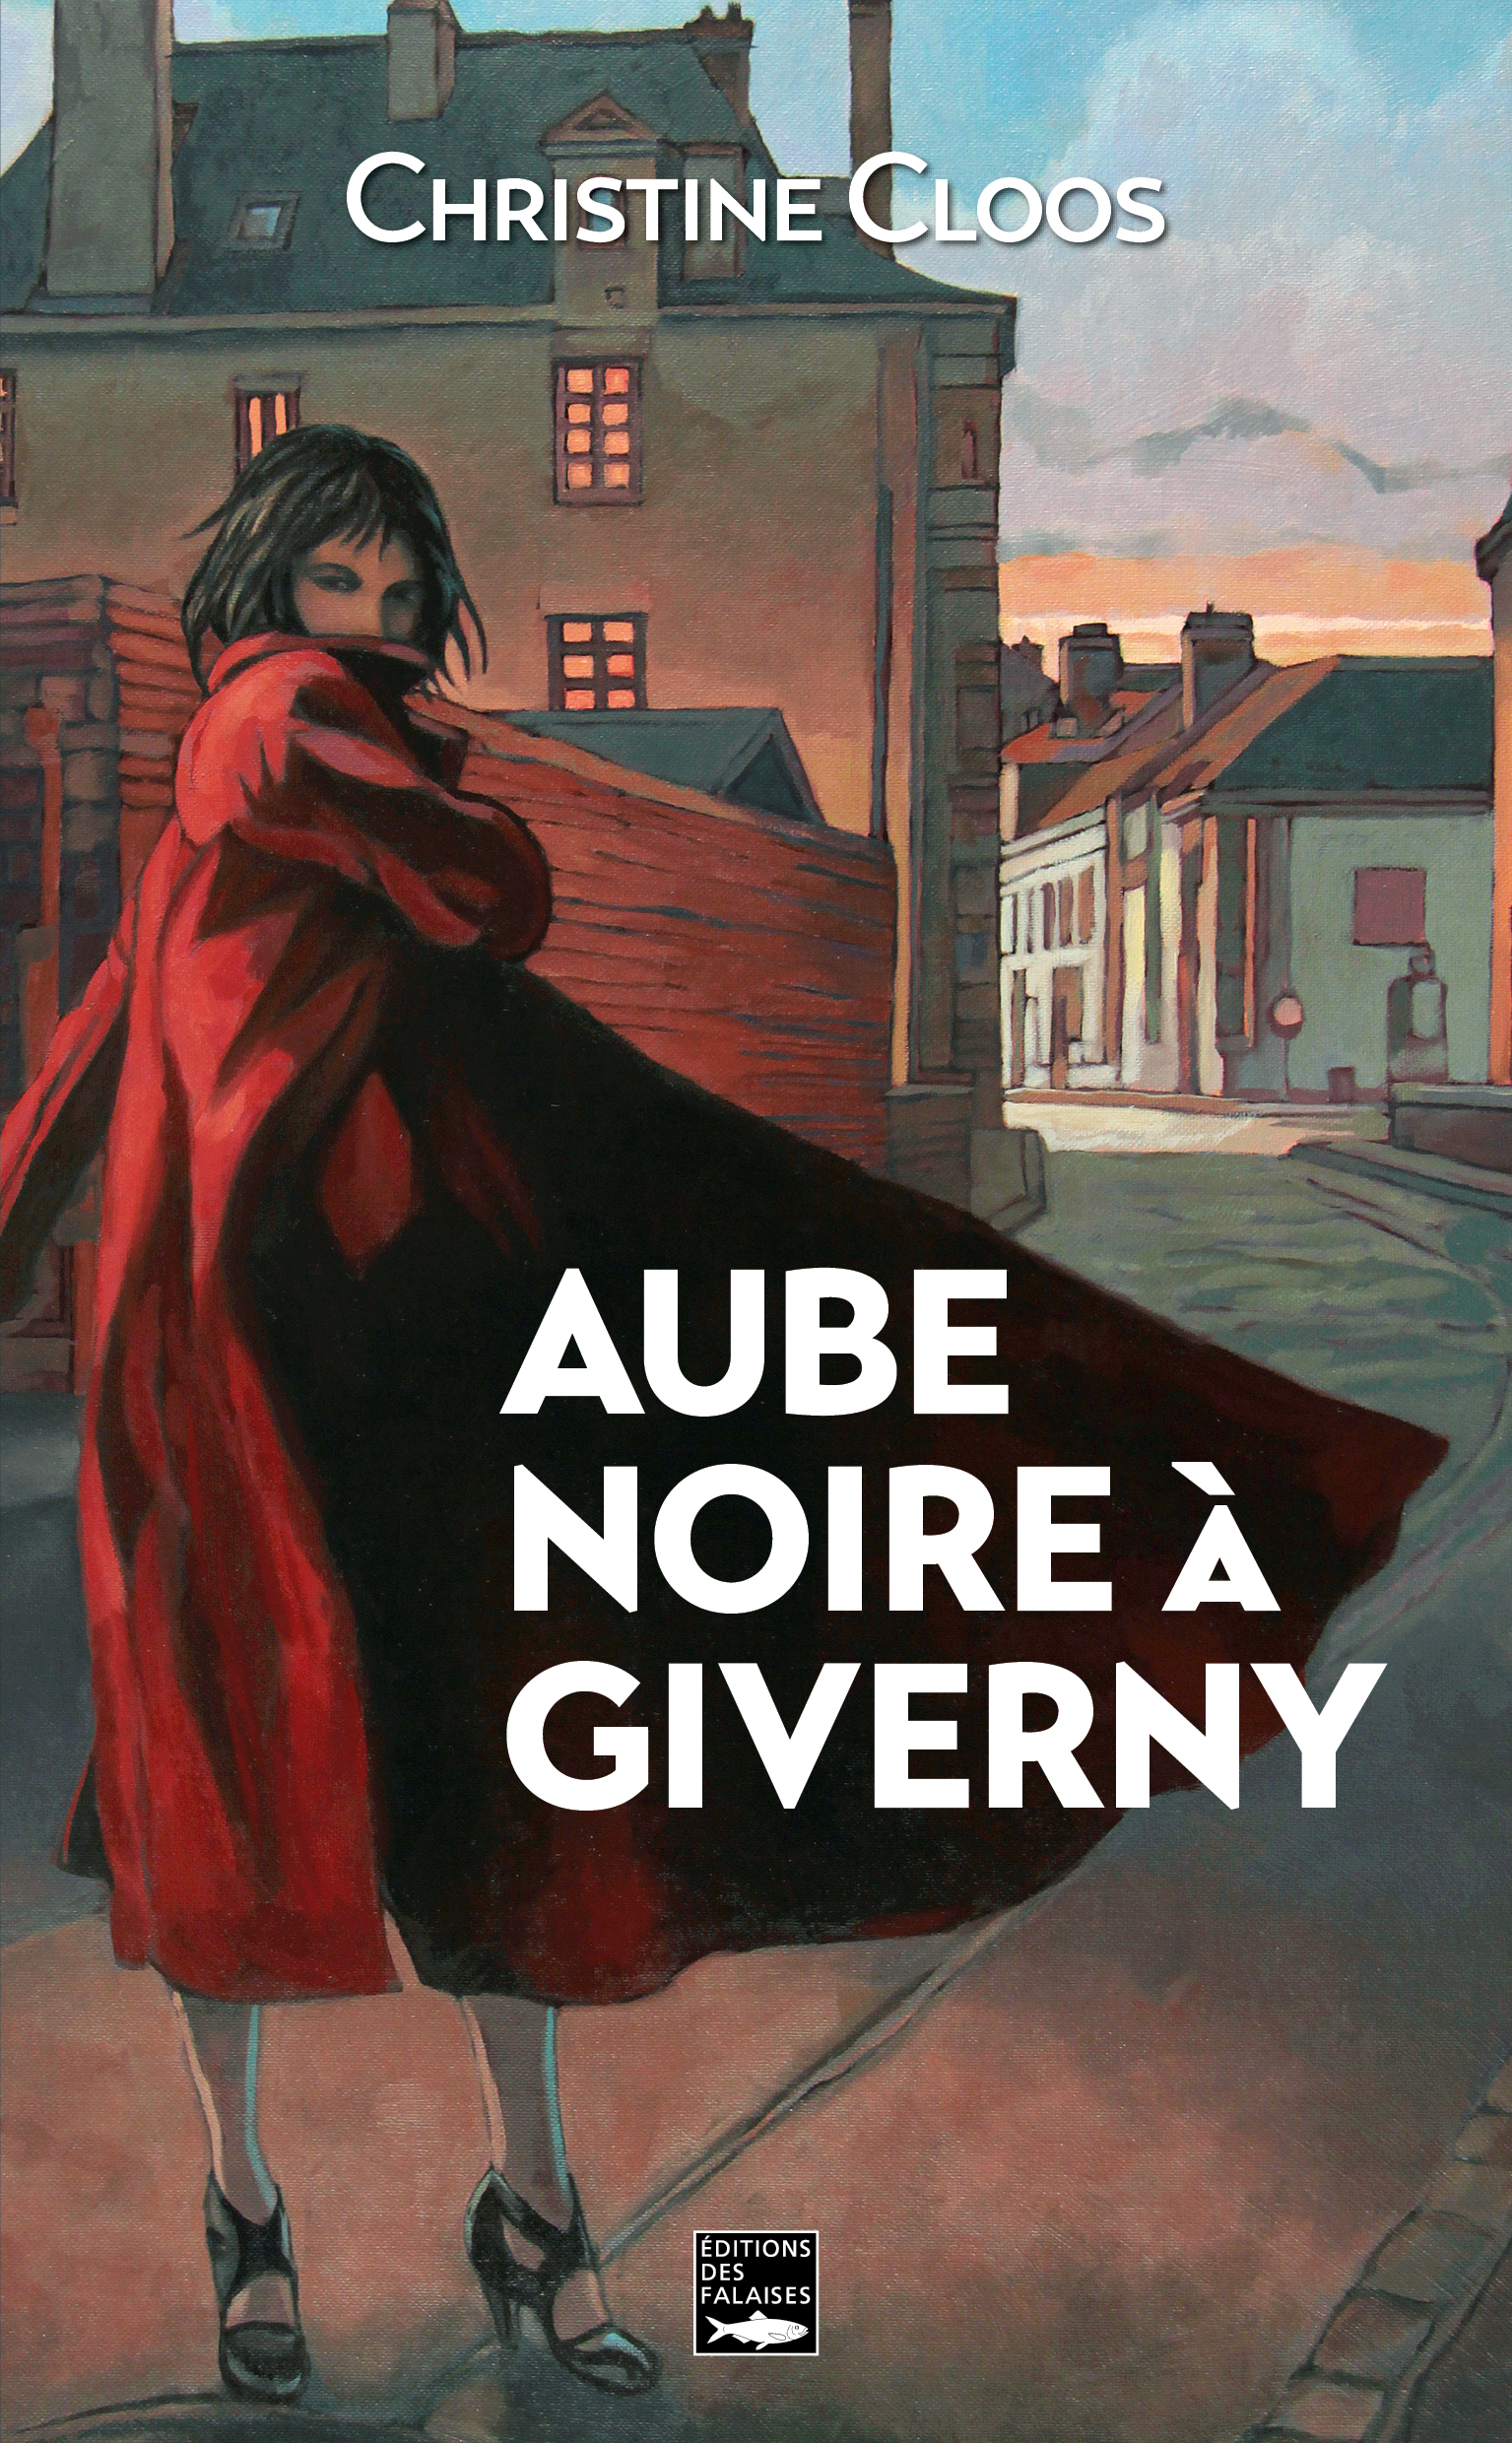 AUBE NOIRE A GIVERNY